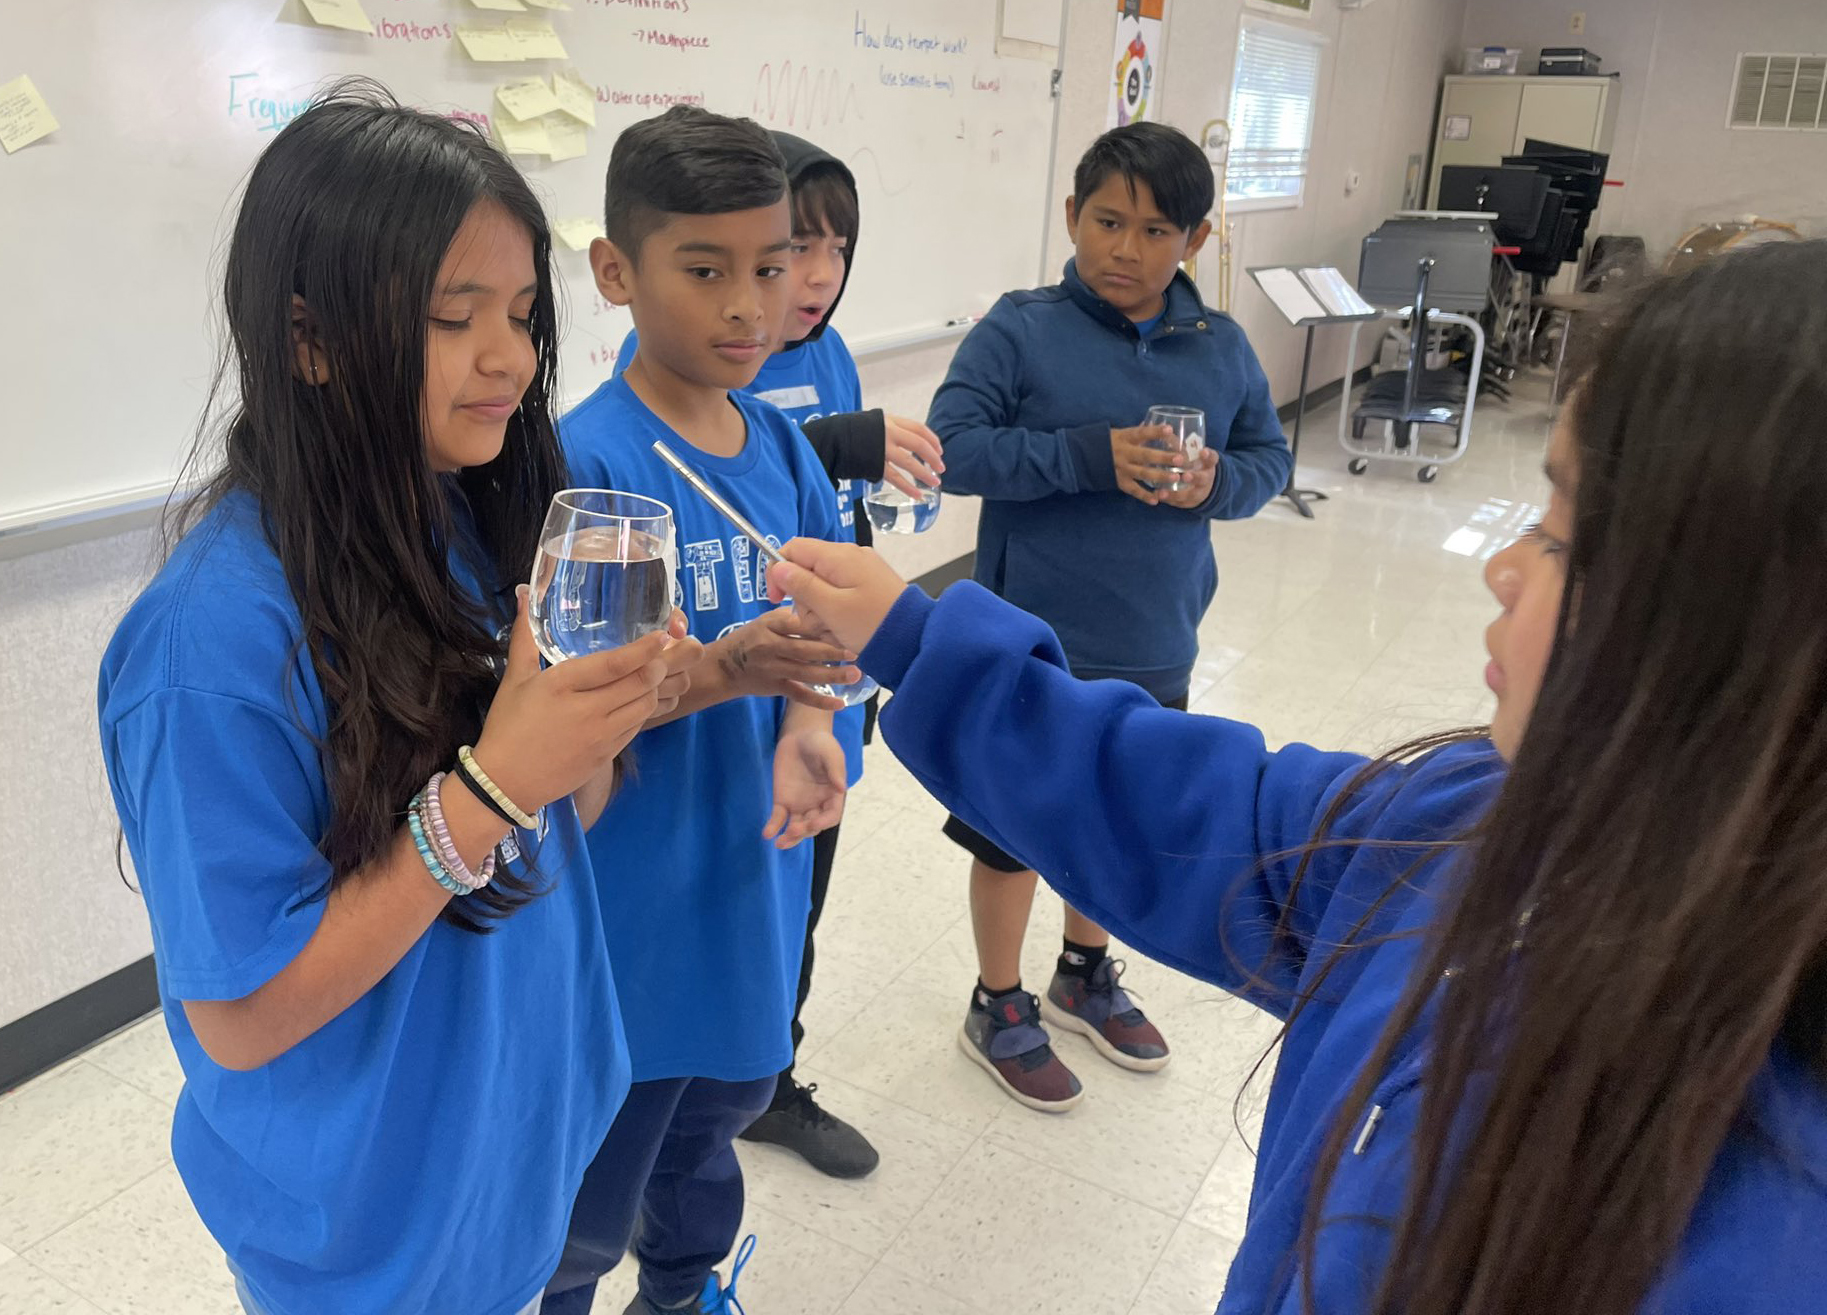 A 6th grade student holds up a glass of water as another student taps a small metal rod at the rim of the glass. Three students stand to watch.